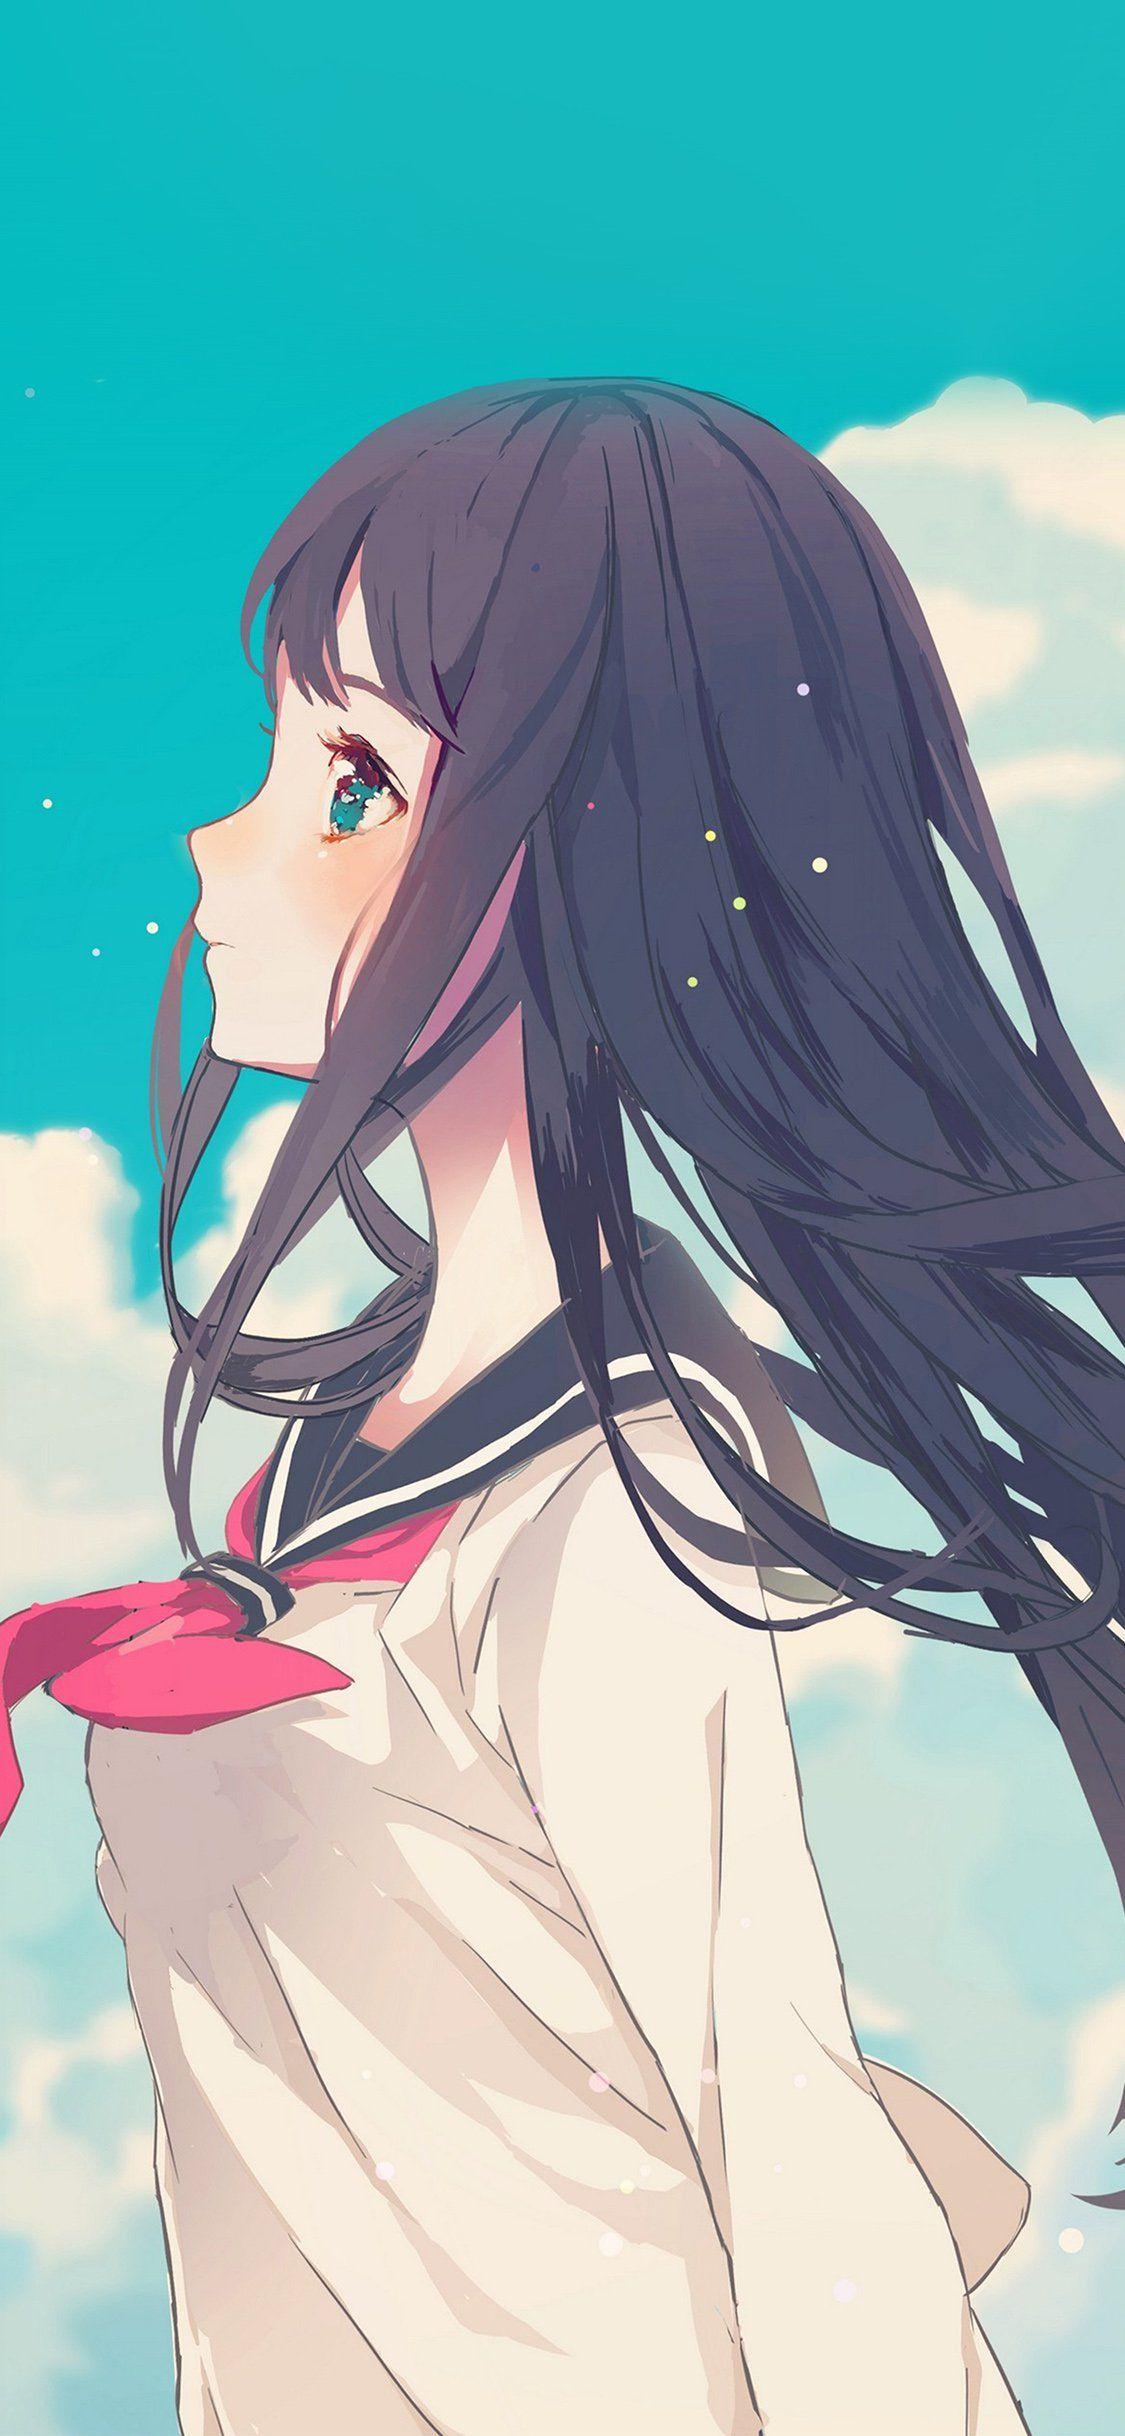 Anime Girl iPhone Wallpapers - Wallpaper Cave